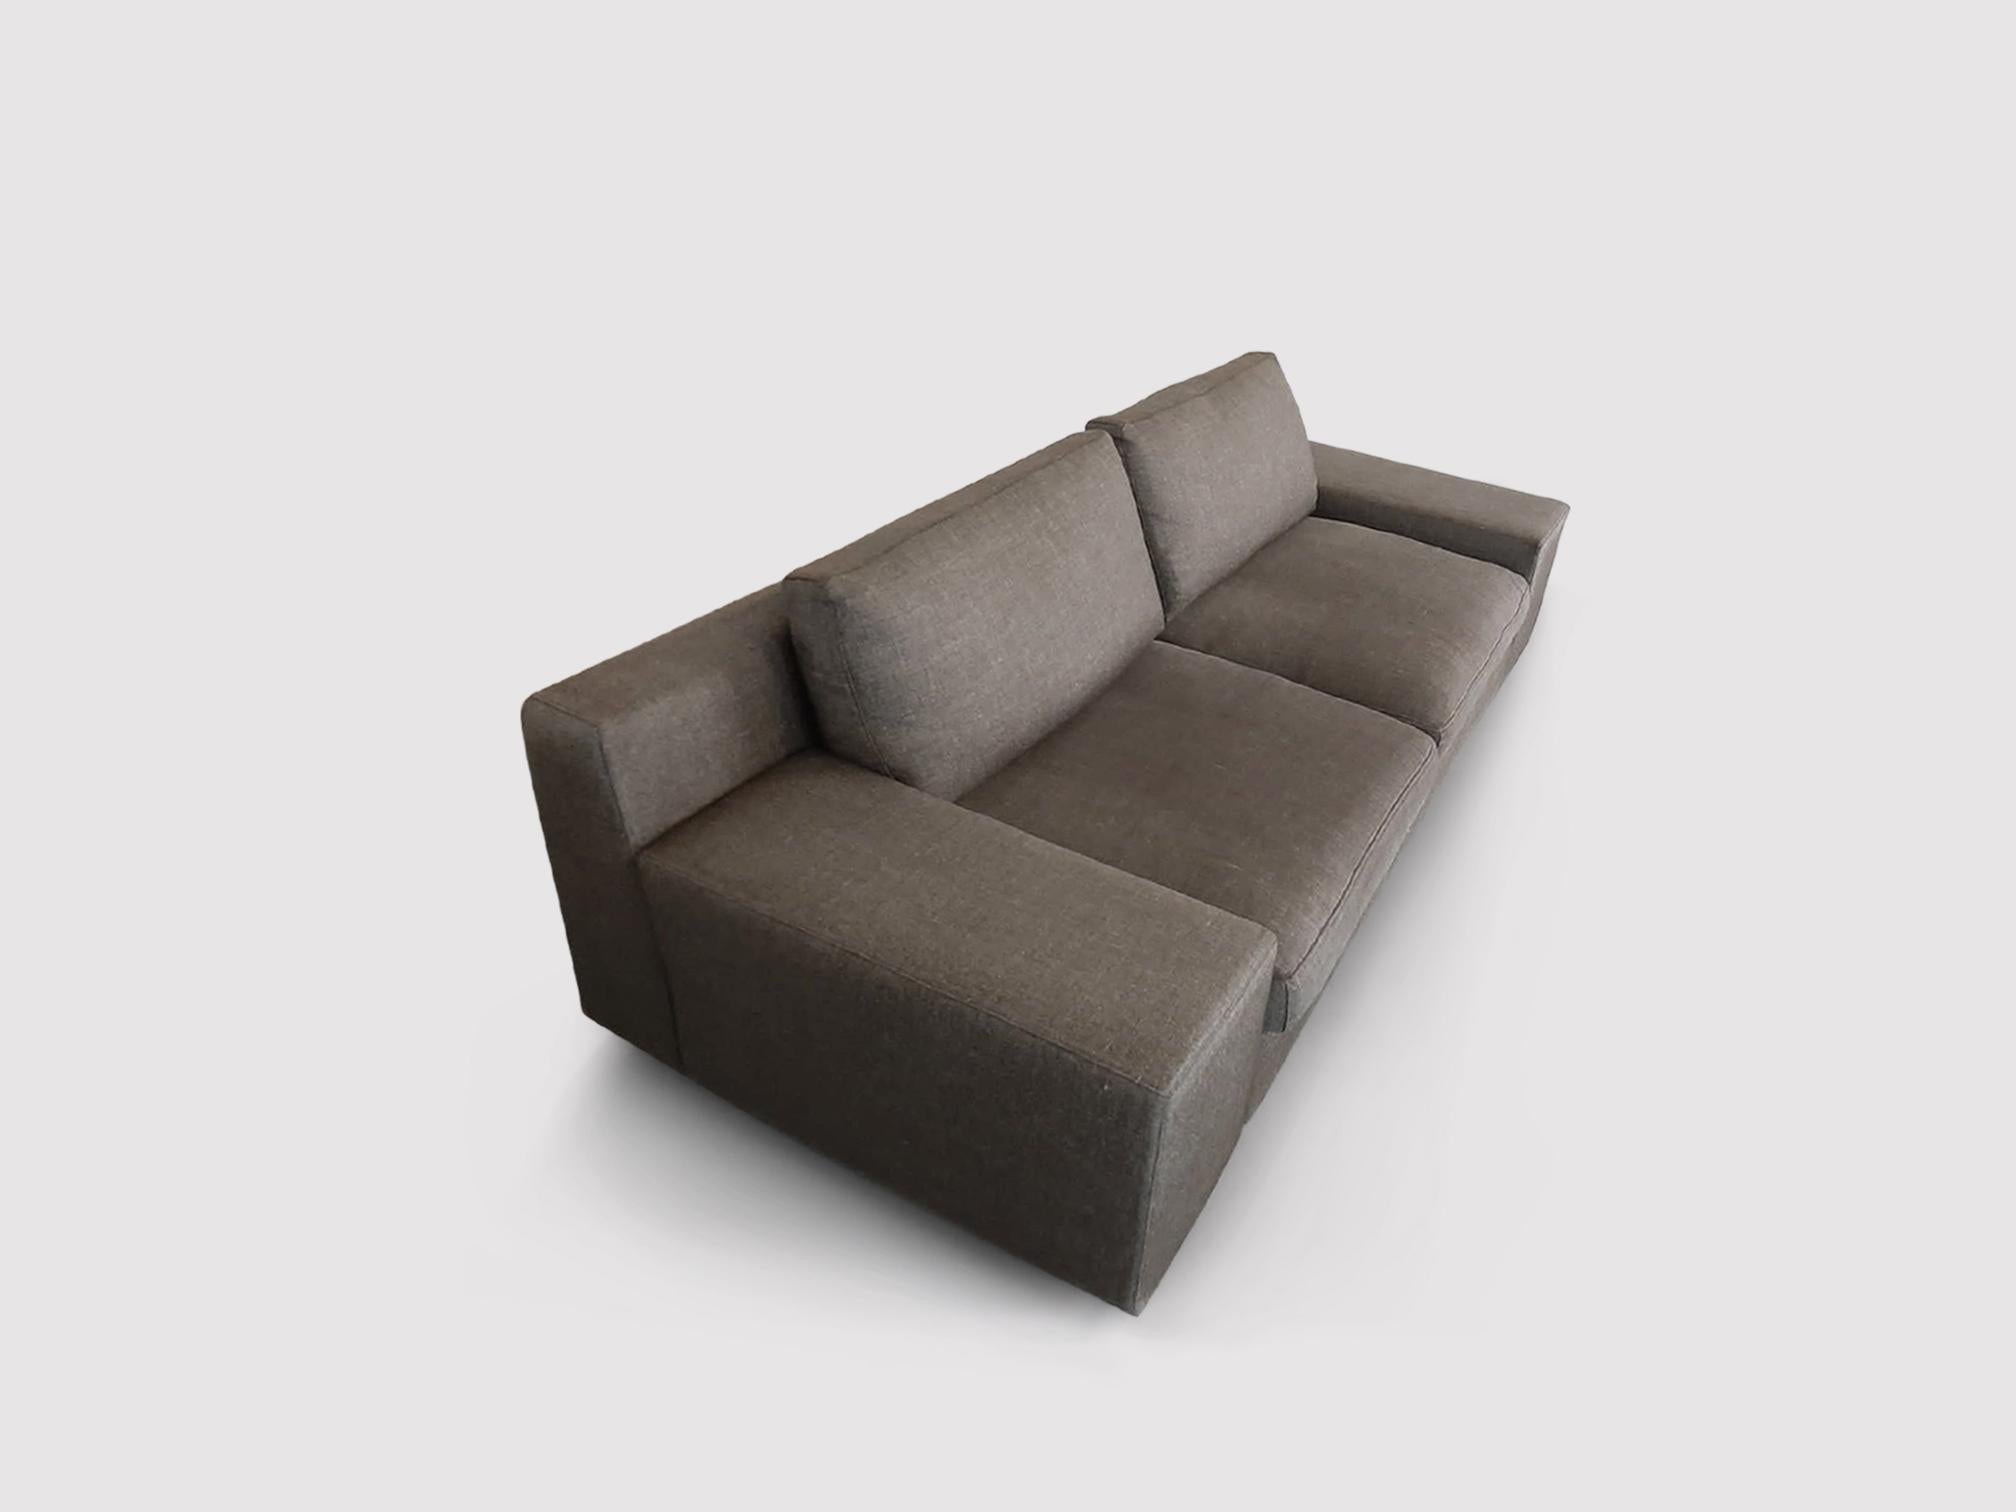 Wool Contemporary 235-236 Mister 2, 5 Seater Sofa by Philippe Starck for Cassina 2004